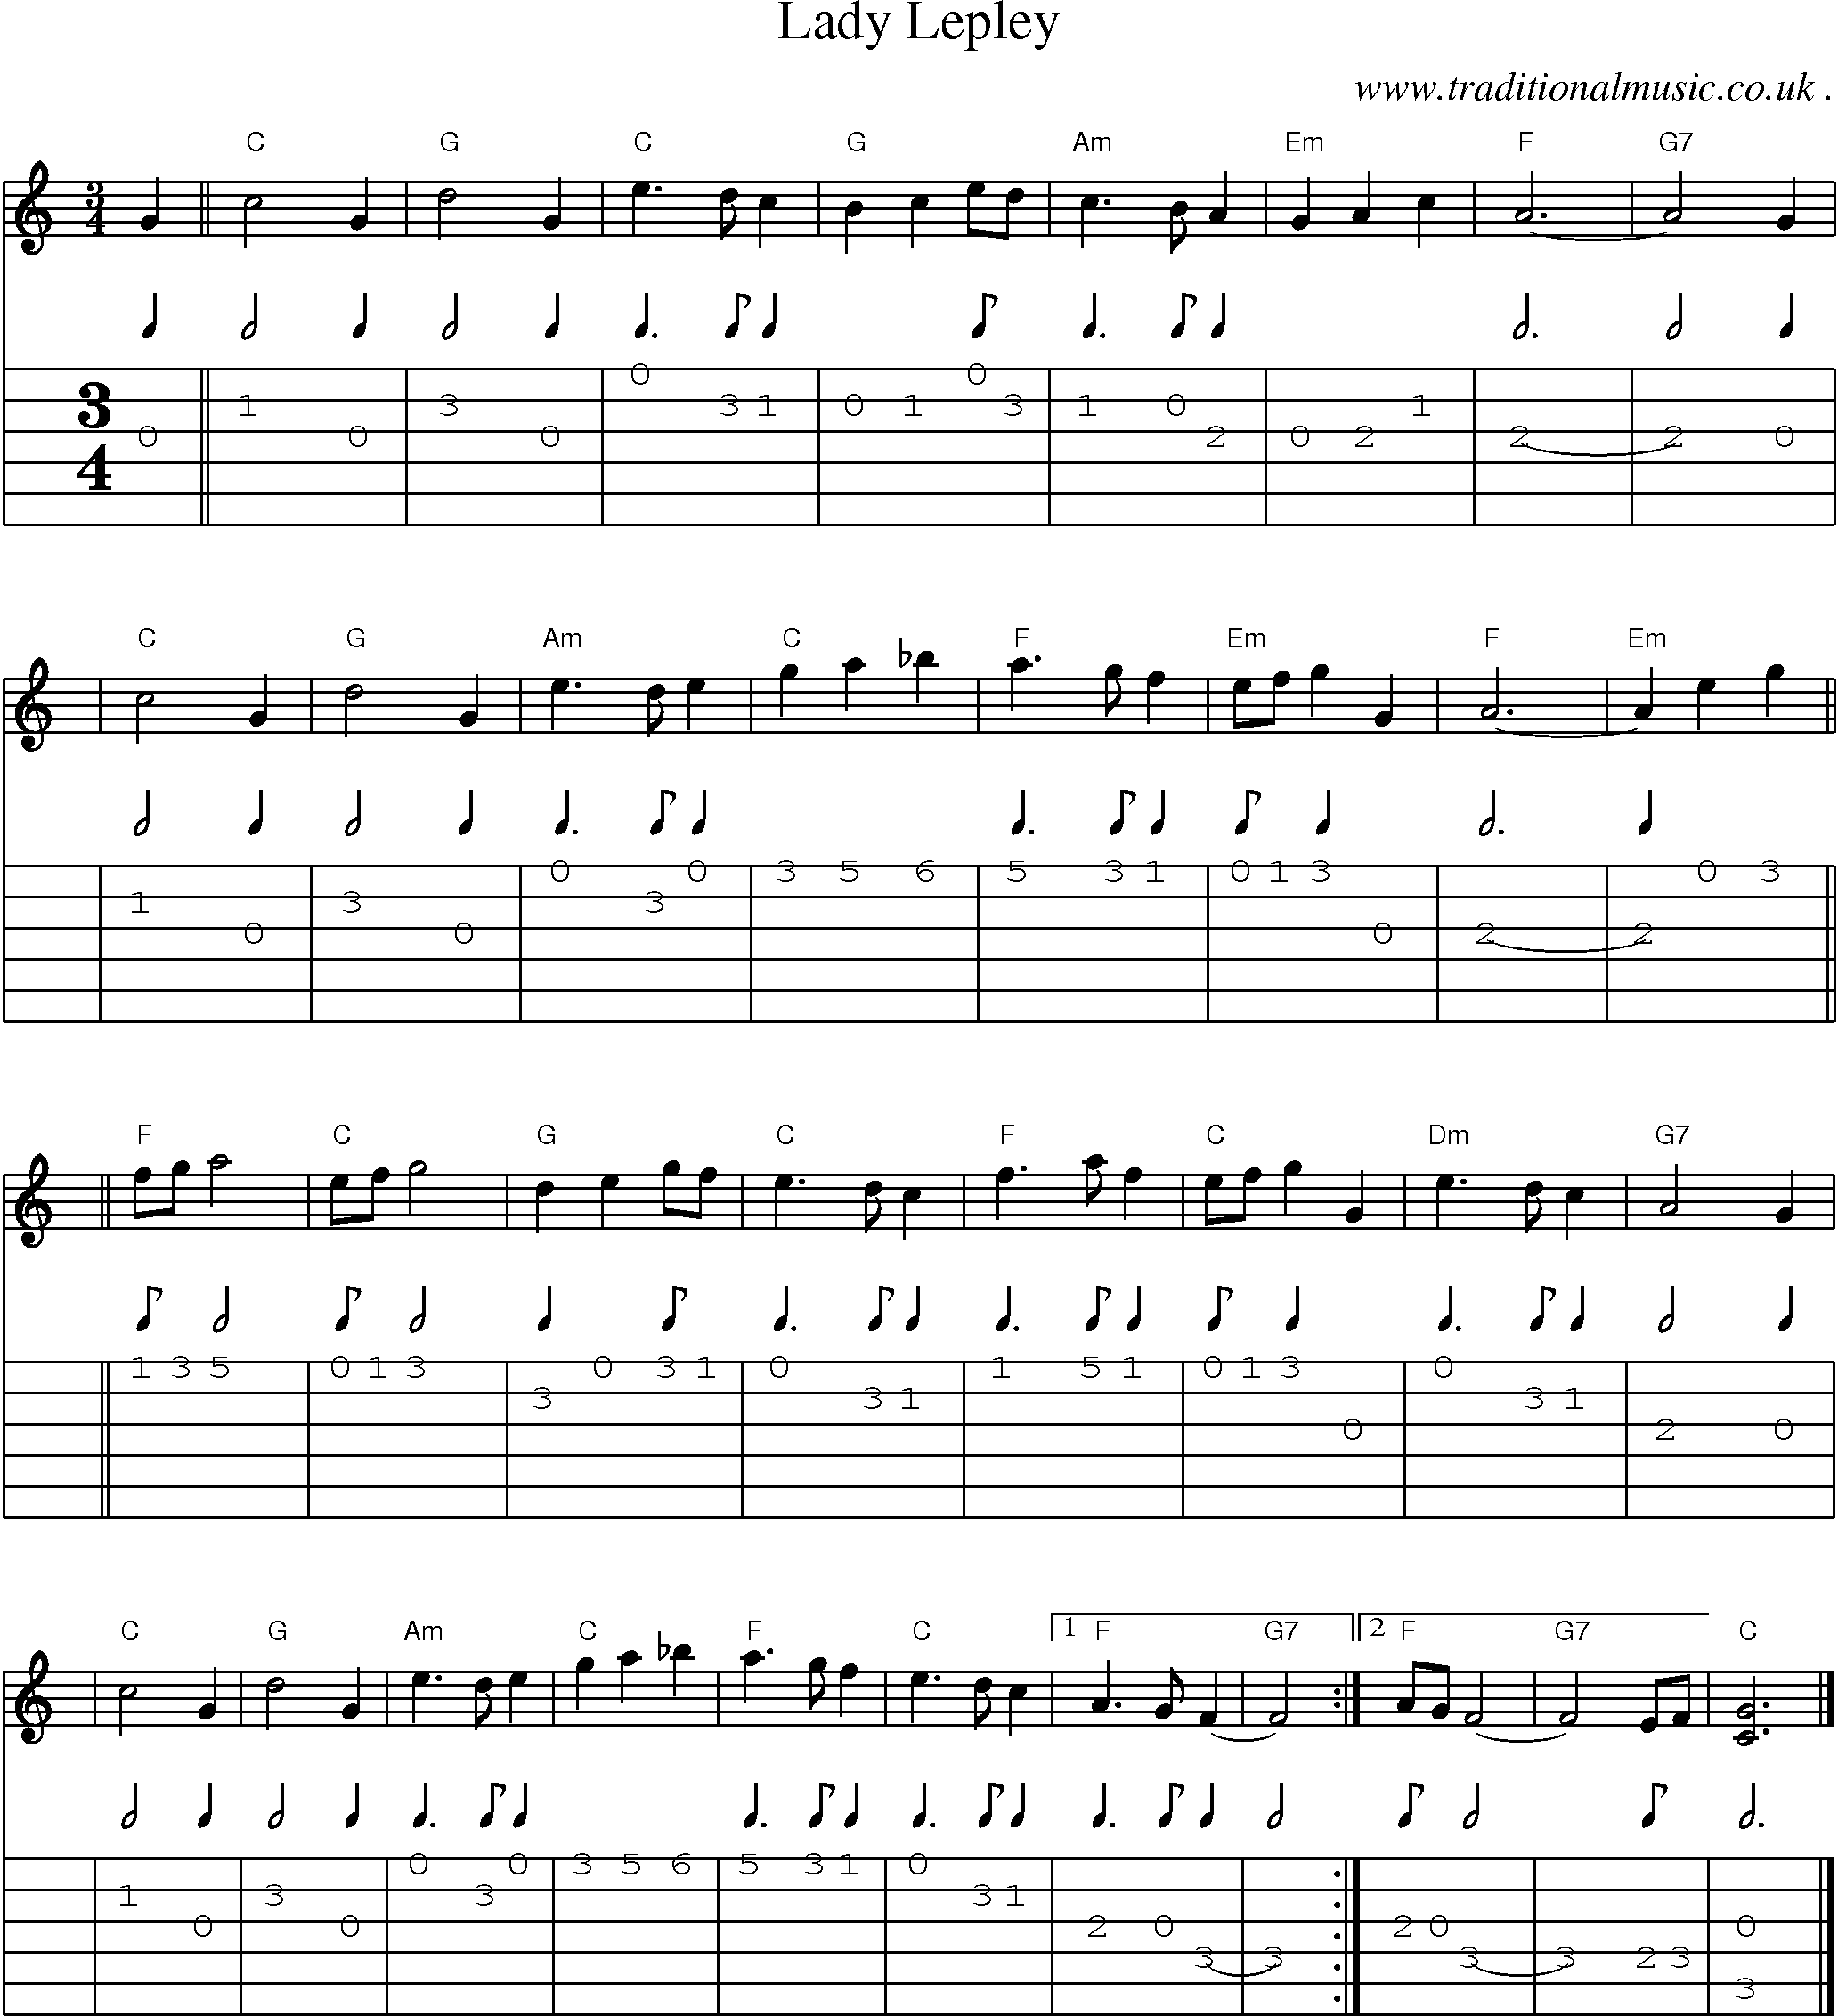 Sheet-music  score, Chords and Guitar Tabs for Lady Lepley